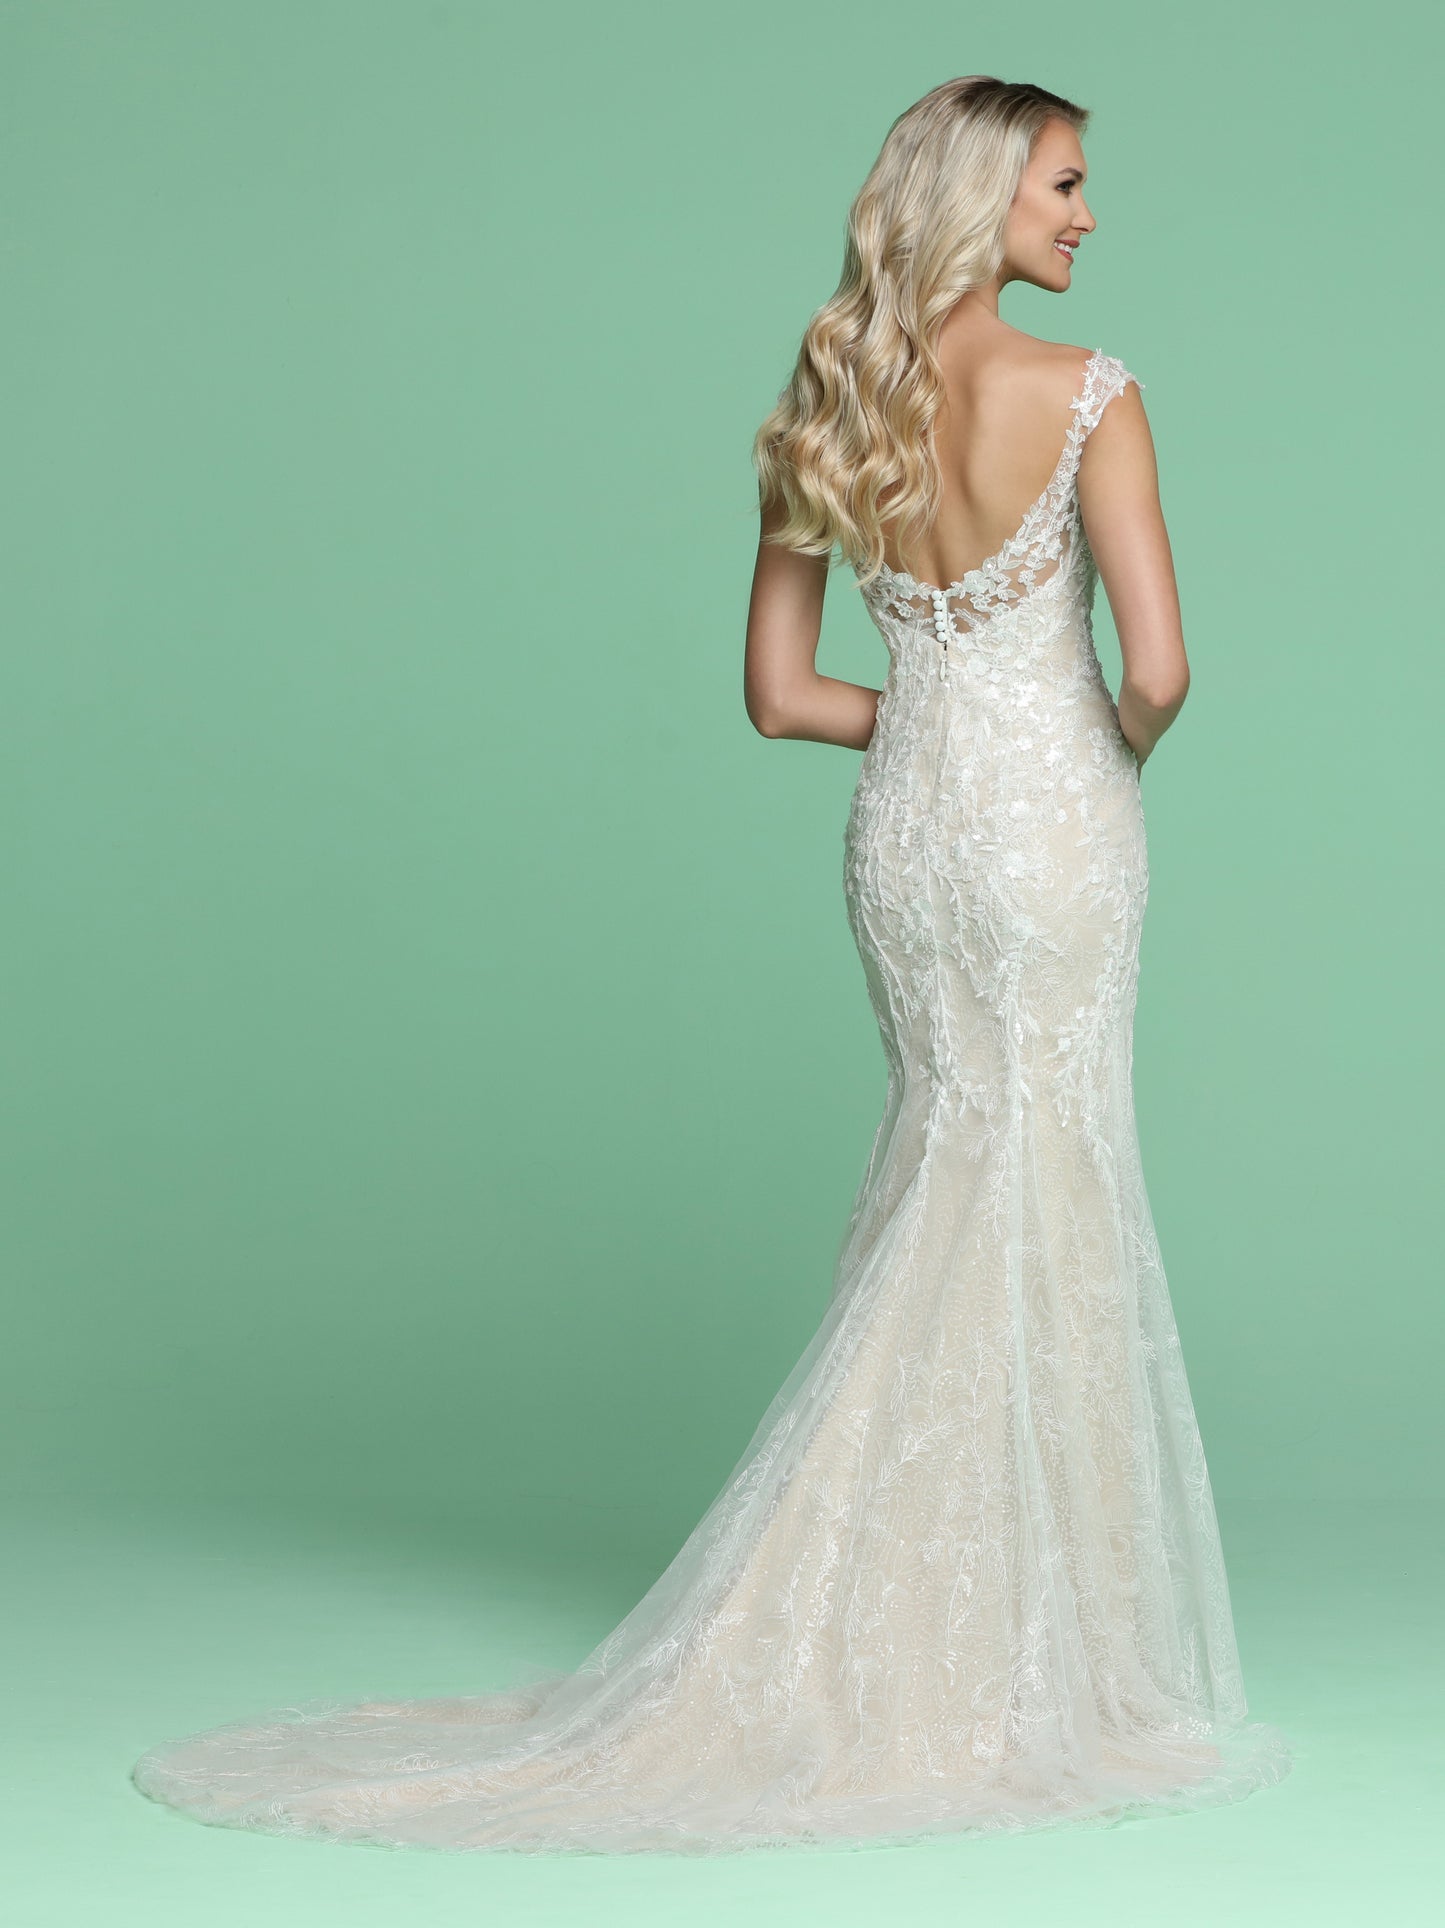 Davinci Bridal 50602 is a long Lace over Lace Floral applique Mermaid silhouette wedding Dress. This Bridal Gown Features a deep sweetheart neckline with off the shoulder sheer lace cap sleeves wrapping around to a sheer lace applique upper V back with buttons. Petite Sequins embellish this detailed lace. Sweeping lace Train!  Available for 1-2 Week Delivery!!!  Available Sizes: 2,4,6,8,10,12,14,16,18,20  Available Colors: Ivory/Ivory, Ivory/Nude